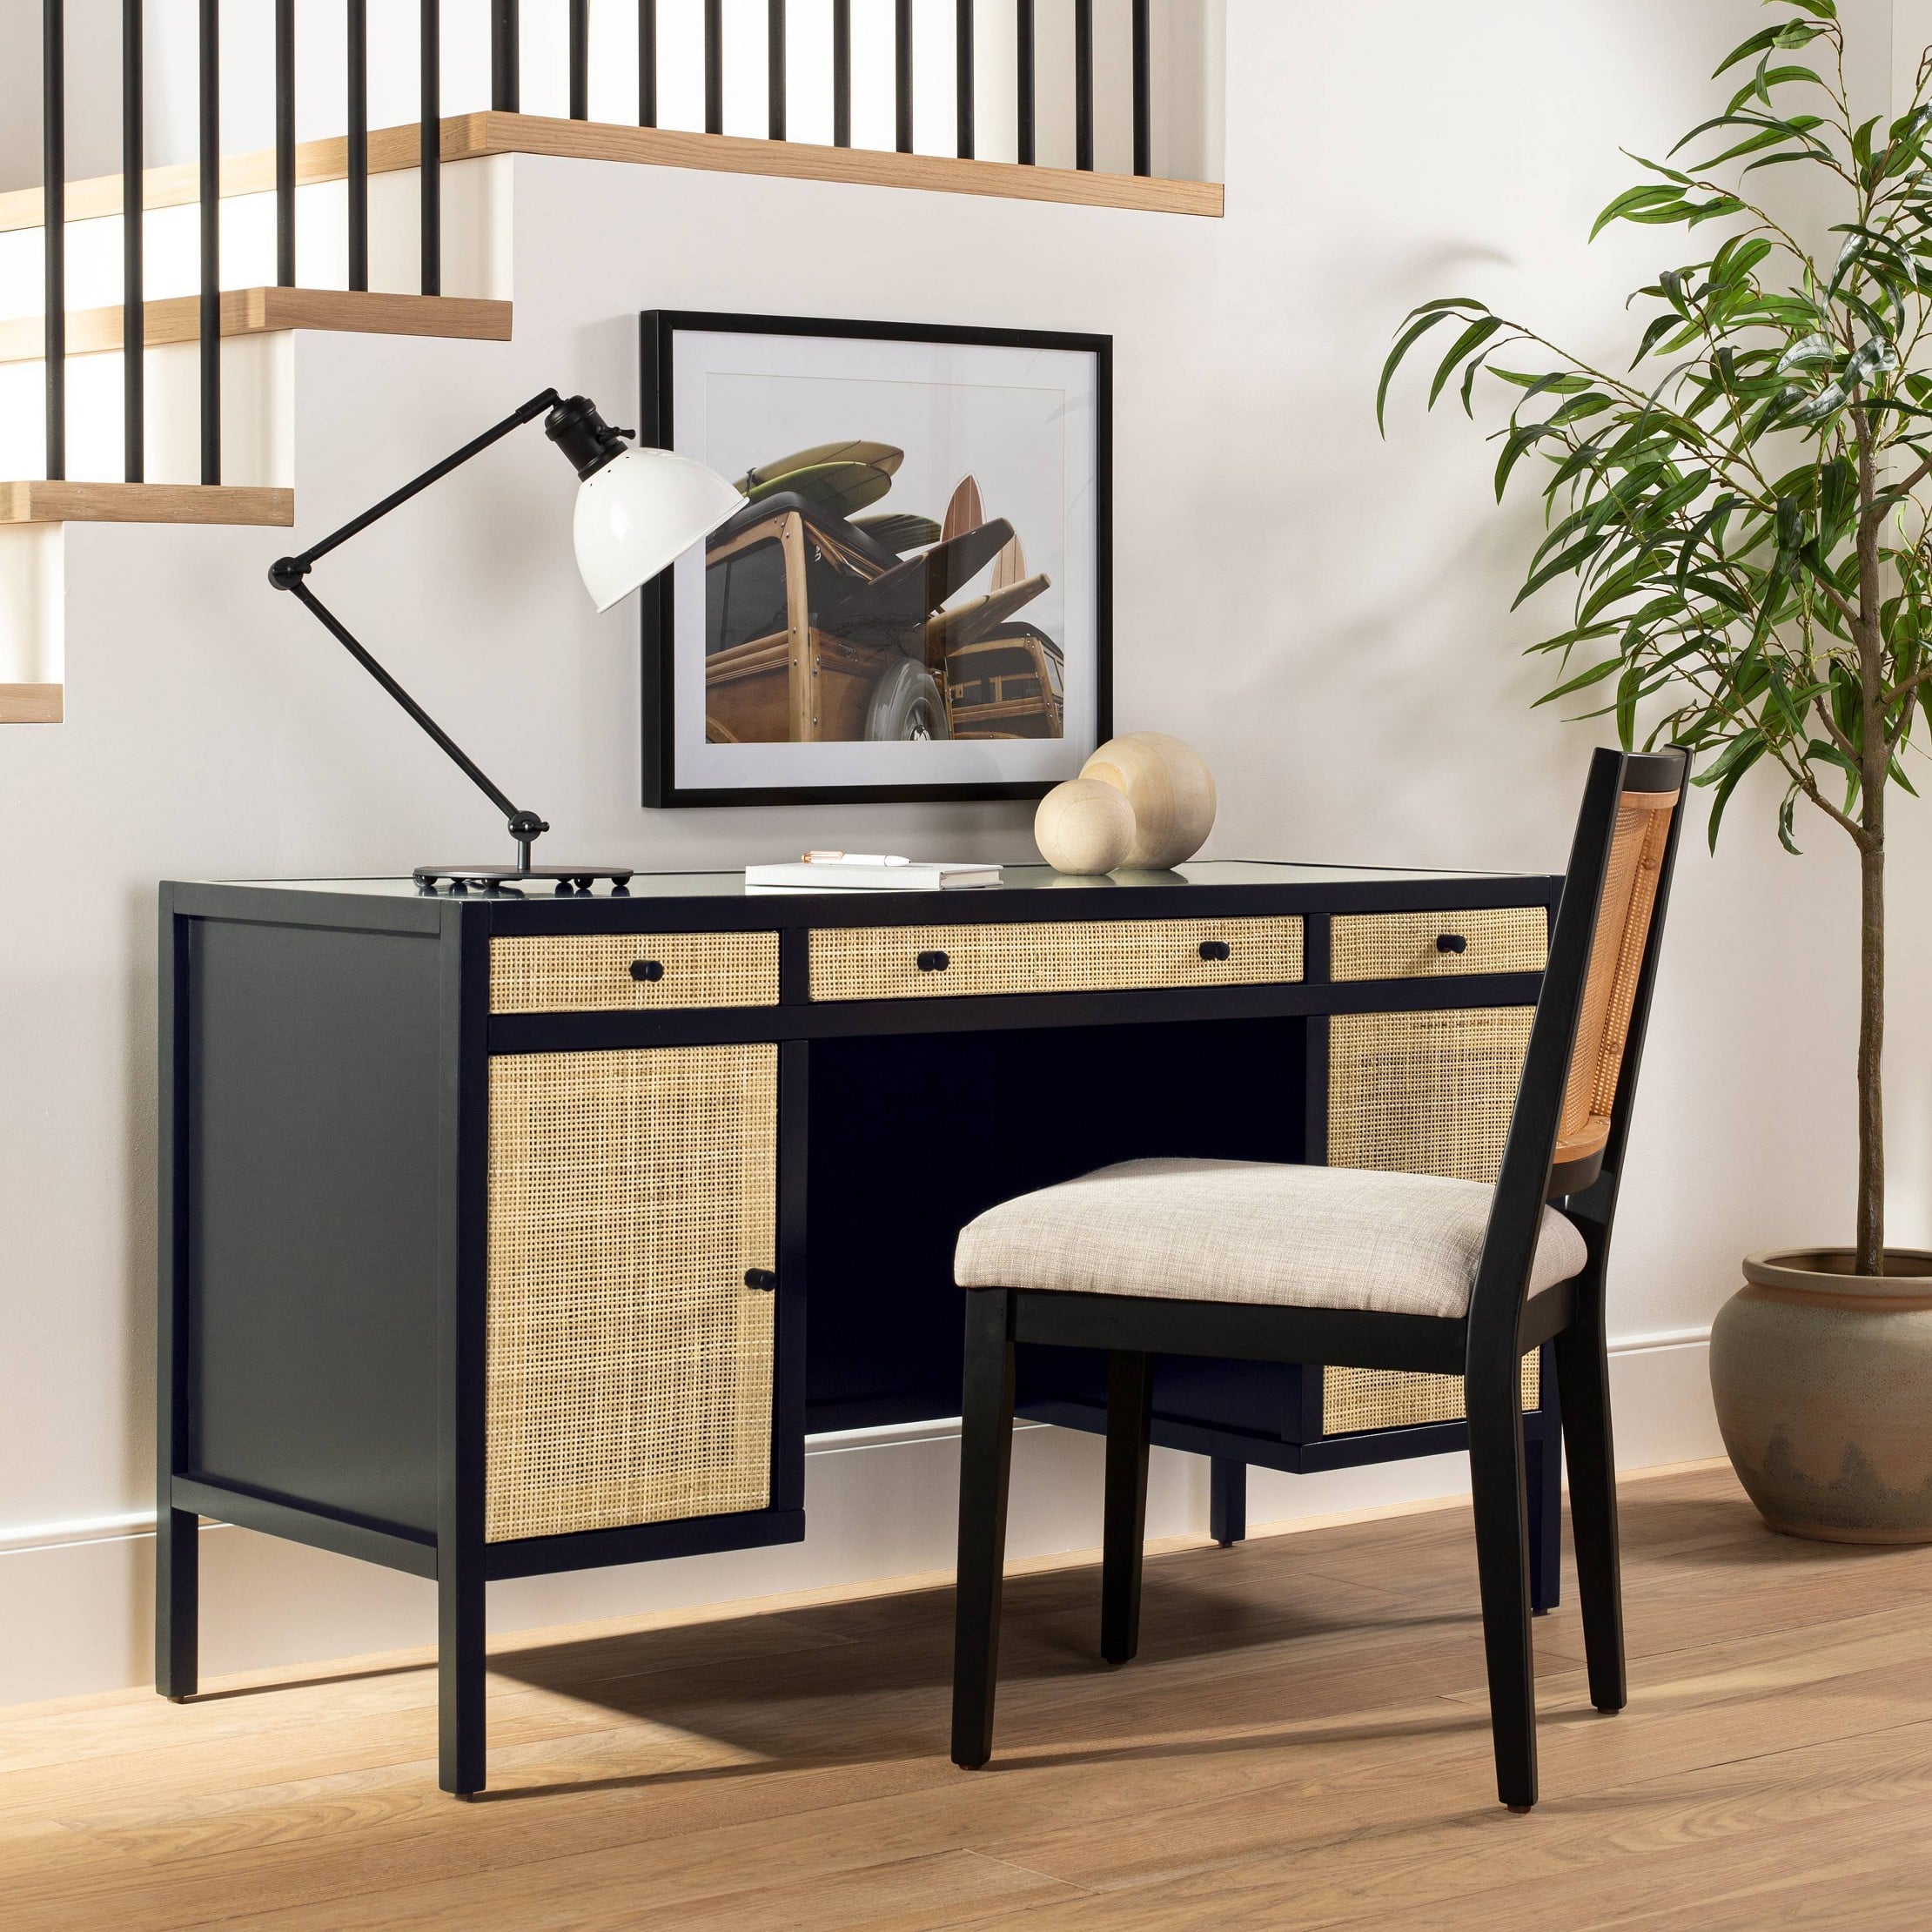 Black Friday 2022: Furniture Deals from Top Retailers - Decorilla